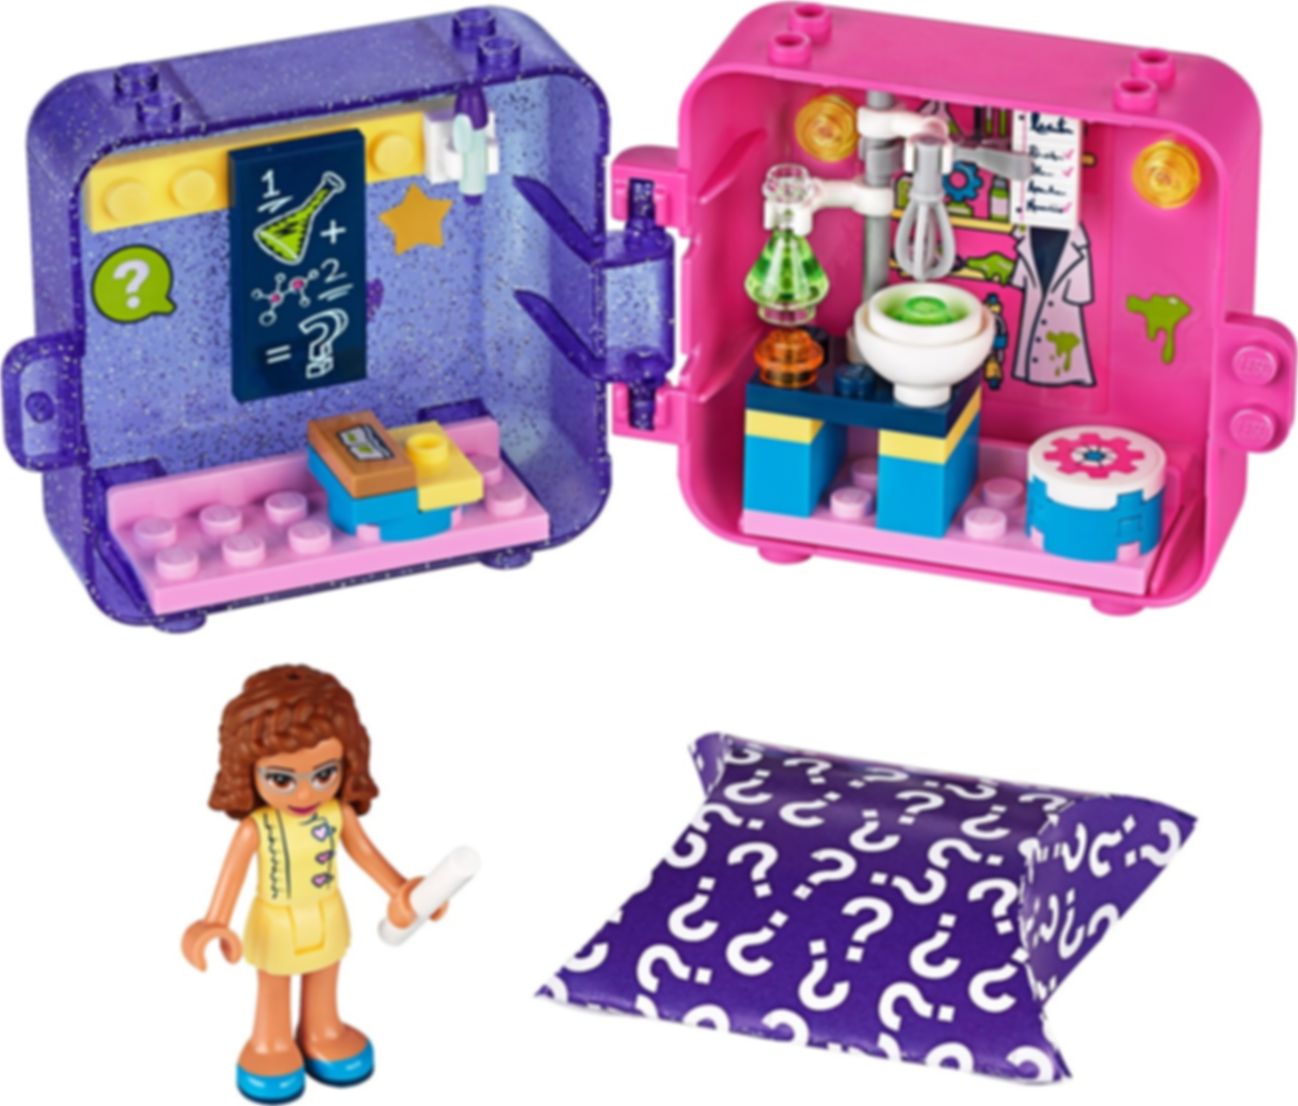 LEGO® Friends Olivia's Play Cube components